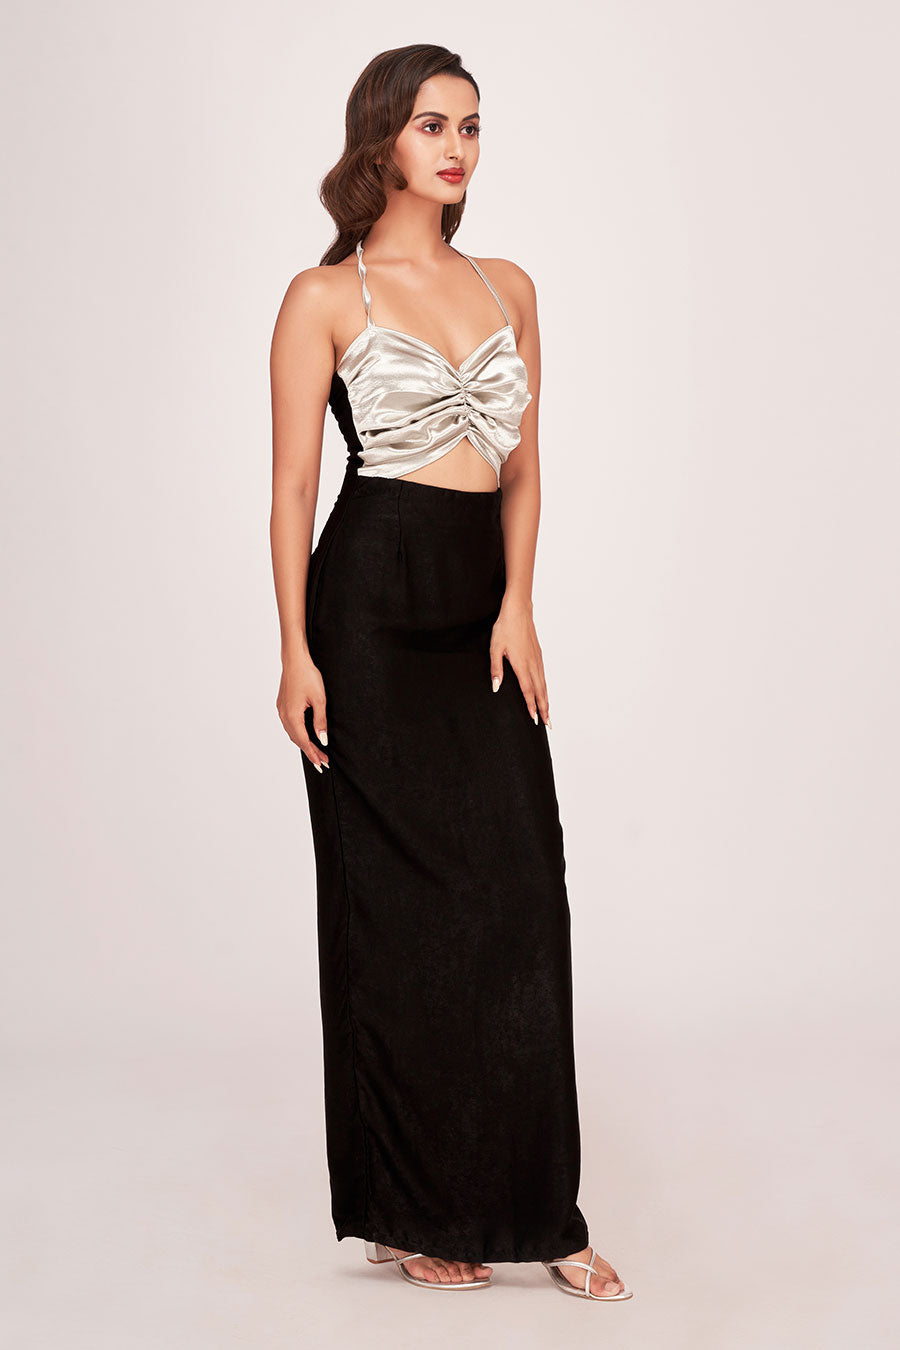 Silver & Black Ruched Long Dress